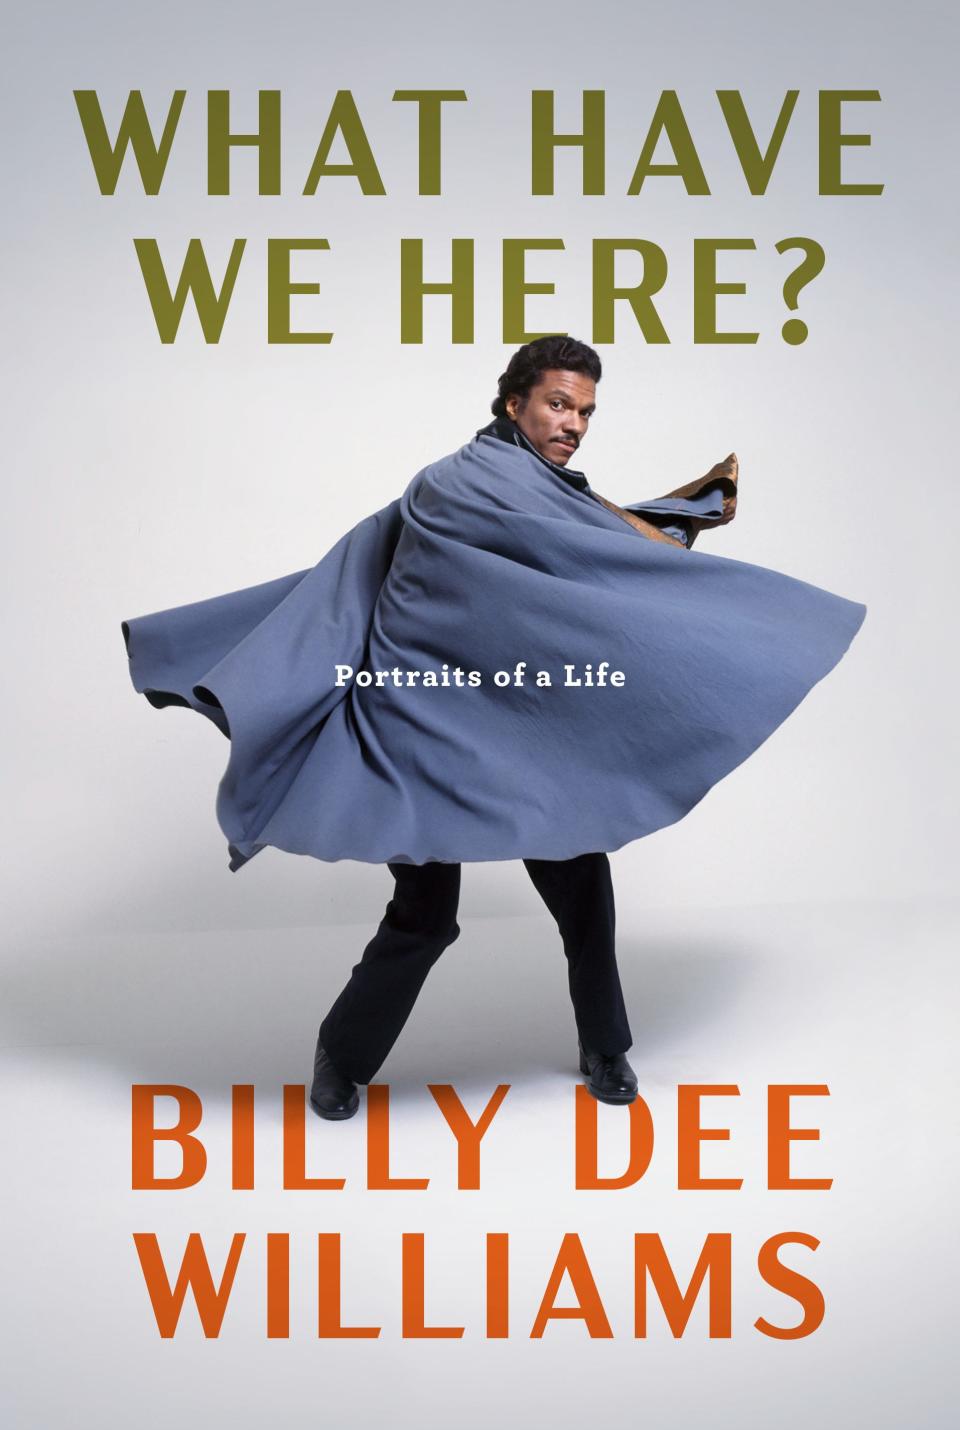 "What Have We Here?" by Billy Dee Williams